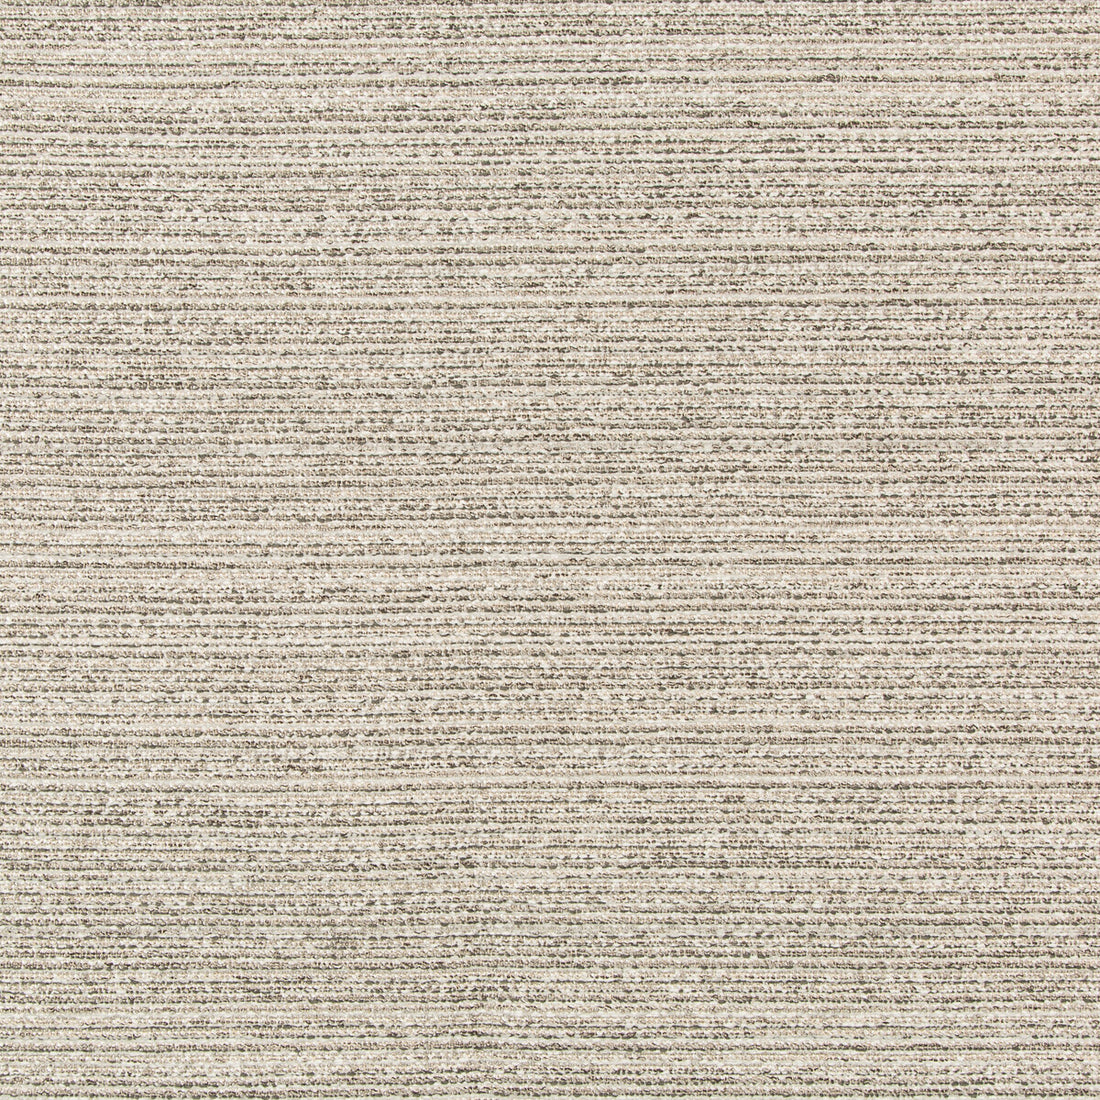 Kravet Design fabric in 36079-1101 color - pattern 36079.1101.0 - by Kravet Design in the Inside Out Performance Fabrics collection